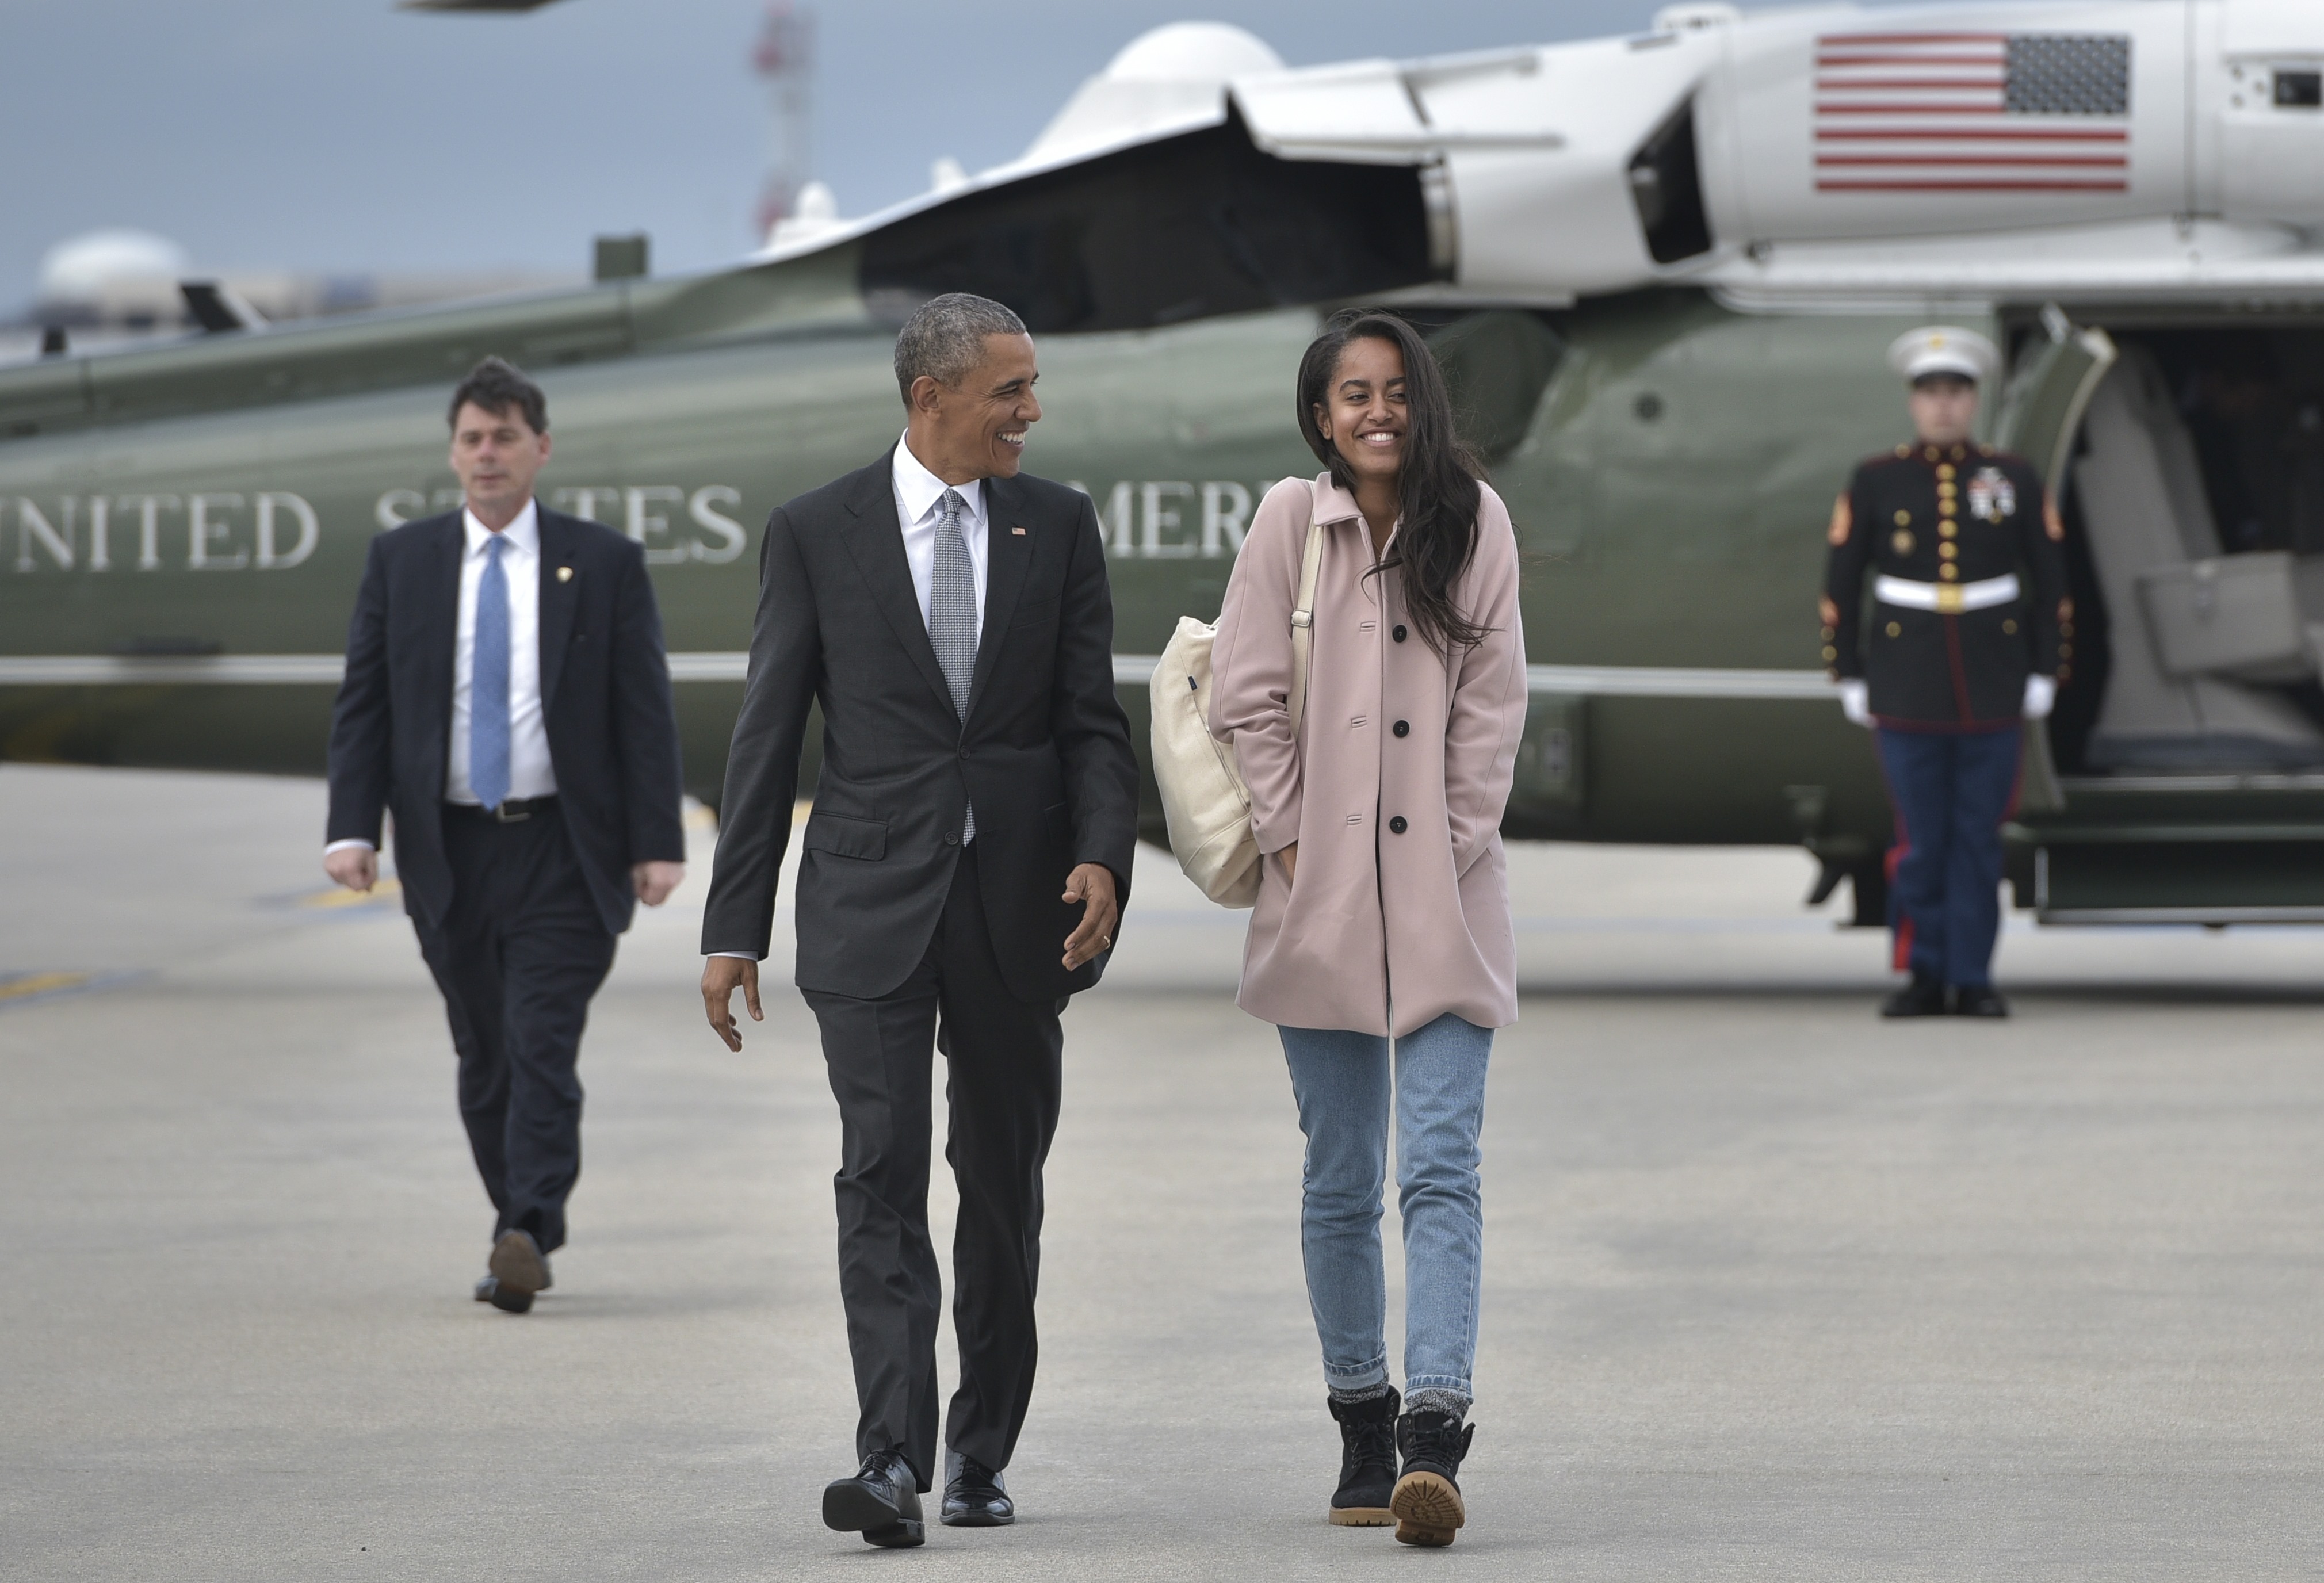 US President Barack Obama and daughter Malia make their way to board Air Force One before departing from Chicago OHare International Airport in Chicago on April 7, 2016. Obama is heading to Los Angeles to attend fundraisers. / AFP / MANDEL NGAN        (Photo credit should read MANDEL NGAN/AFP/Getty Images) (MANDEL NGAN&mdash;AFP/Getty Images)